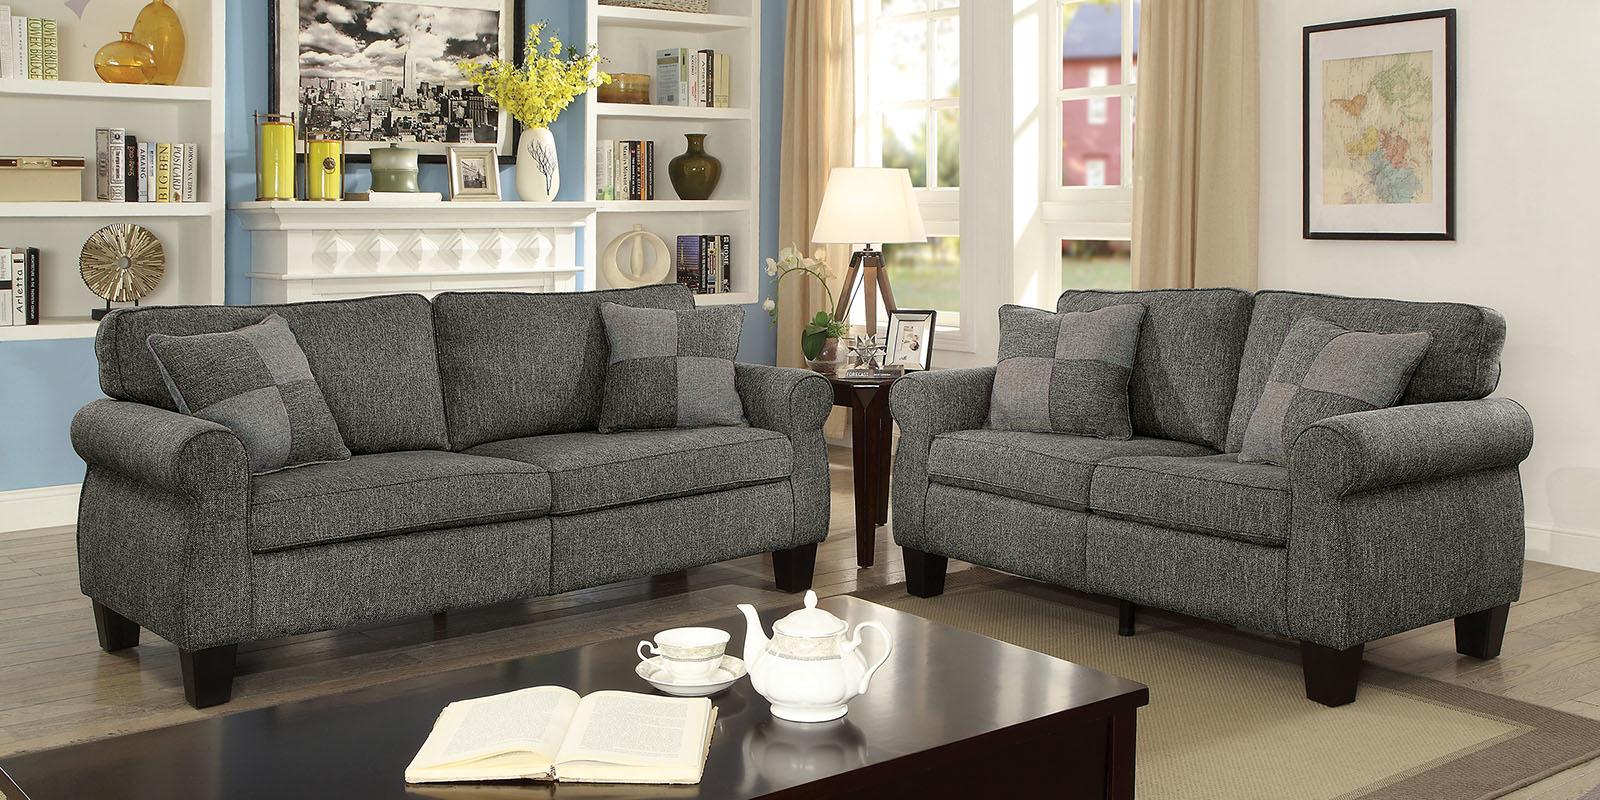 Transitional Sofa and Loveseat Set CM6328GY-2PC Rhian CM6328GY-2PC in Dark Gray 